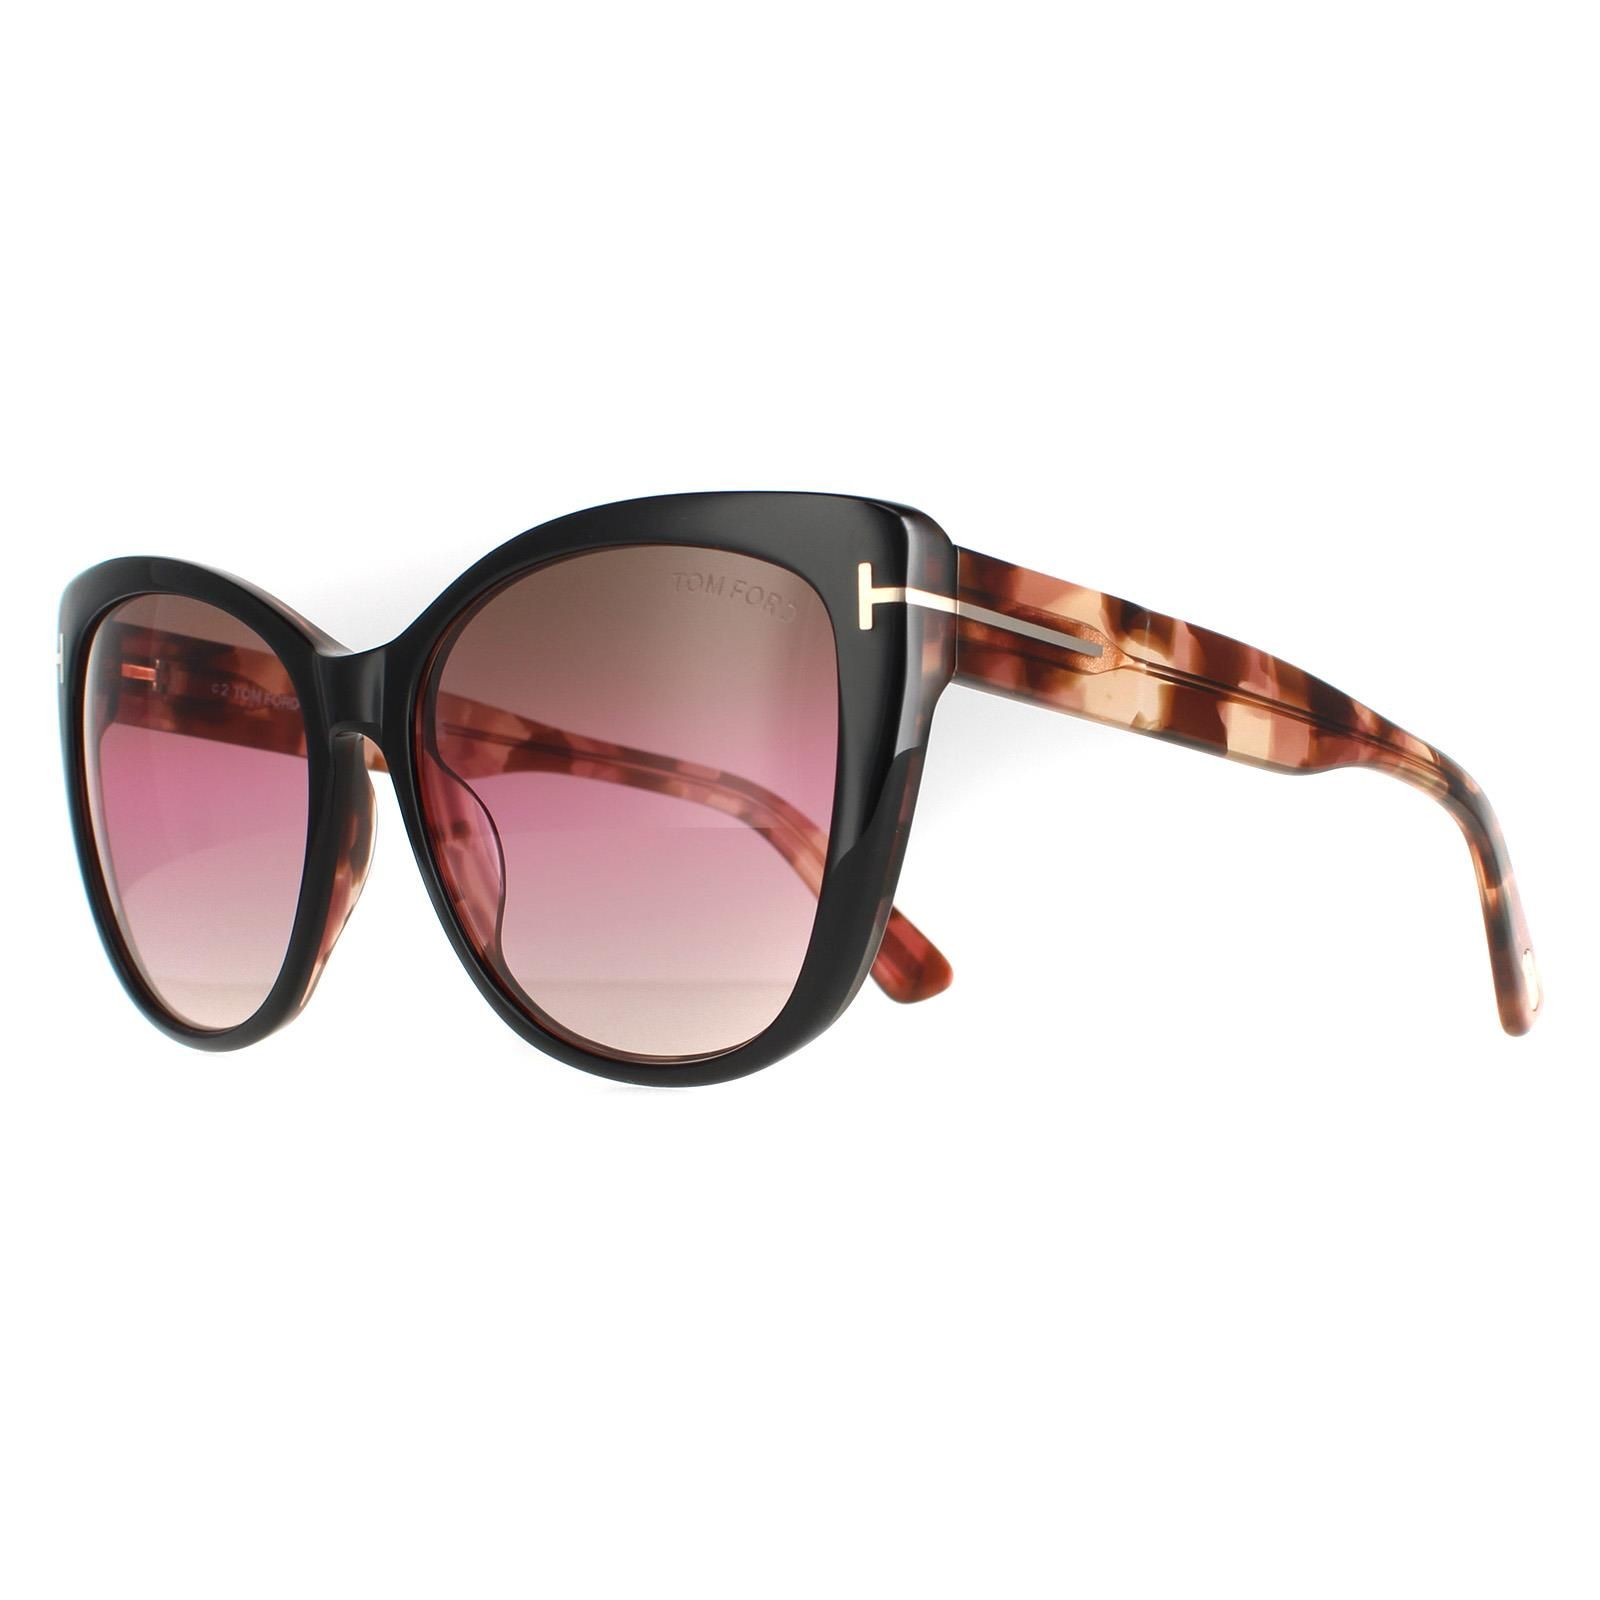 Tom Ford Cat Eye Womens Black and Havana Brown Pink Gradient FT0937 Nora Sunglasses are a gorgeous cat eye design crafted from chunky acetate and embellished with the Tom Ford T logo on the temples.